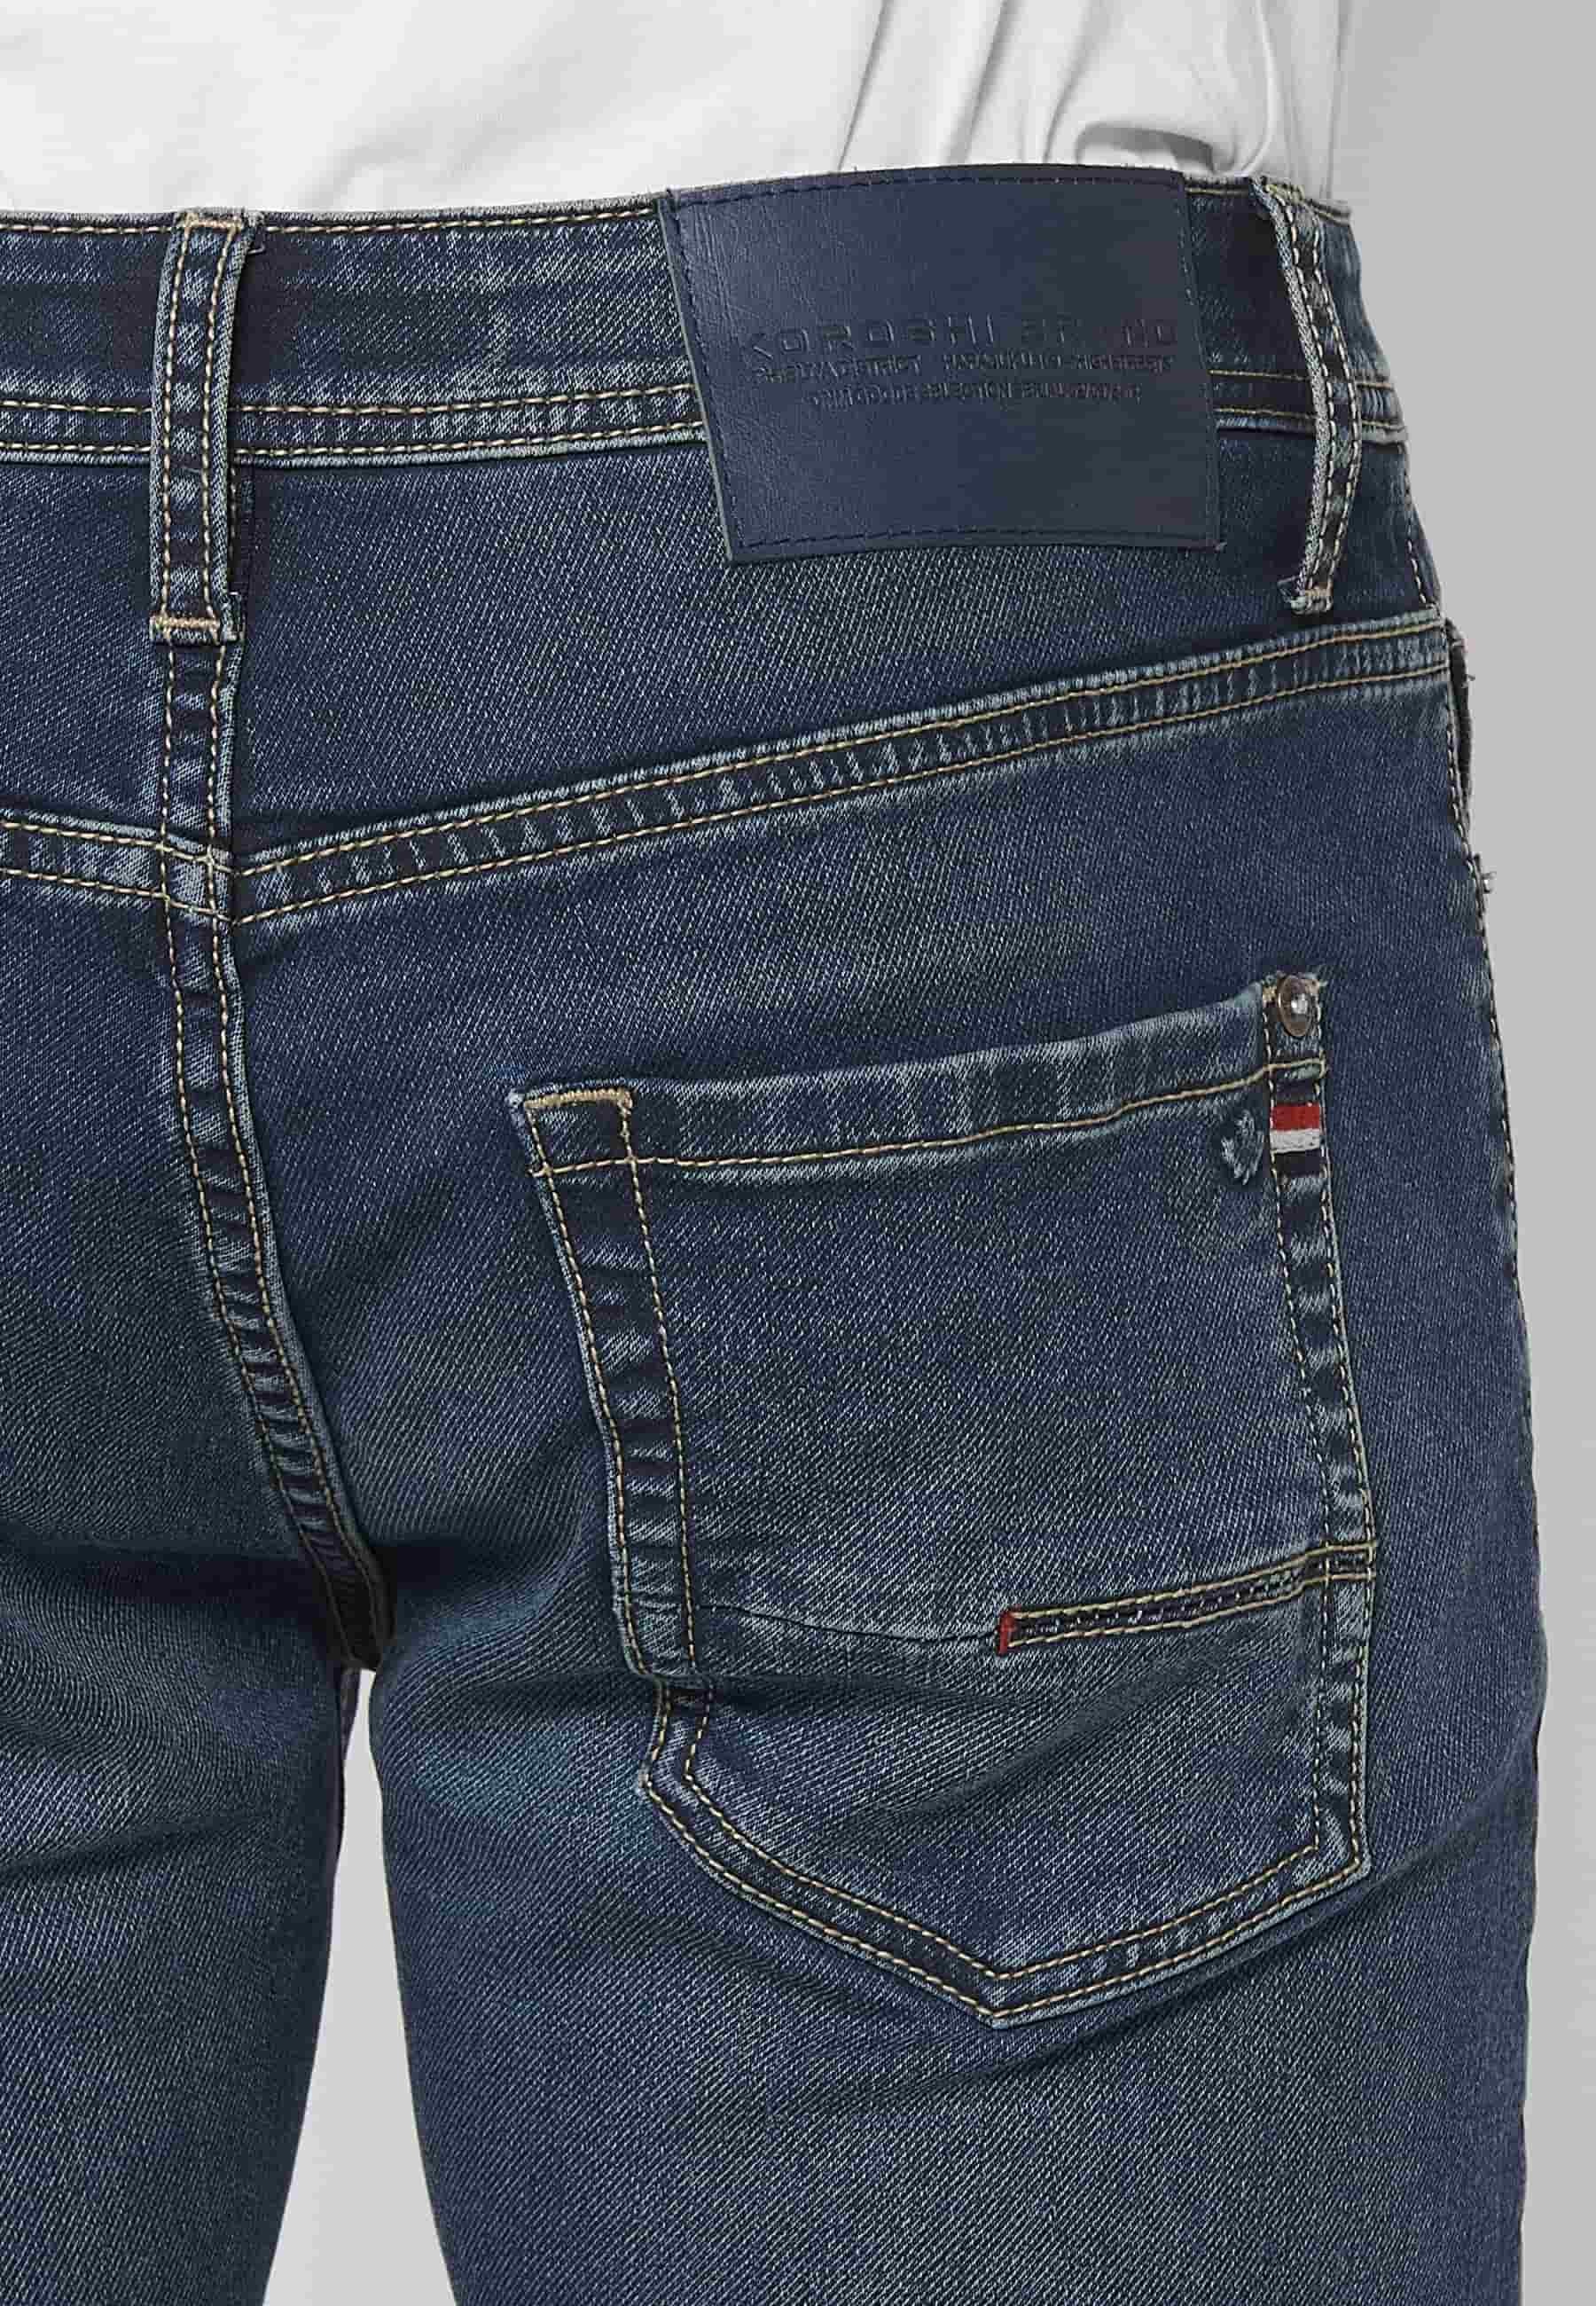 Slim fit long jeans with front zipper and button closure with five pockets, one blue pocket pocket for Men 8